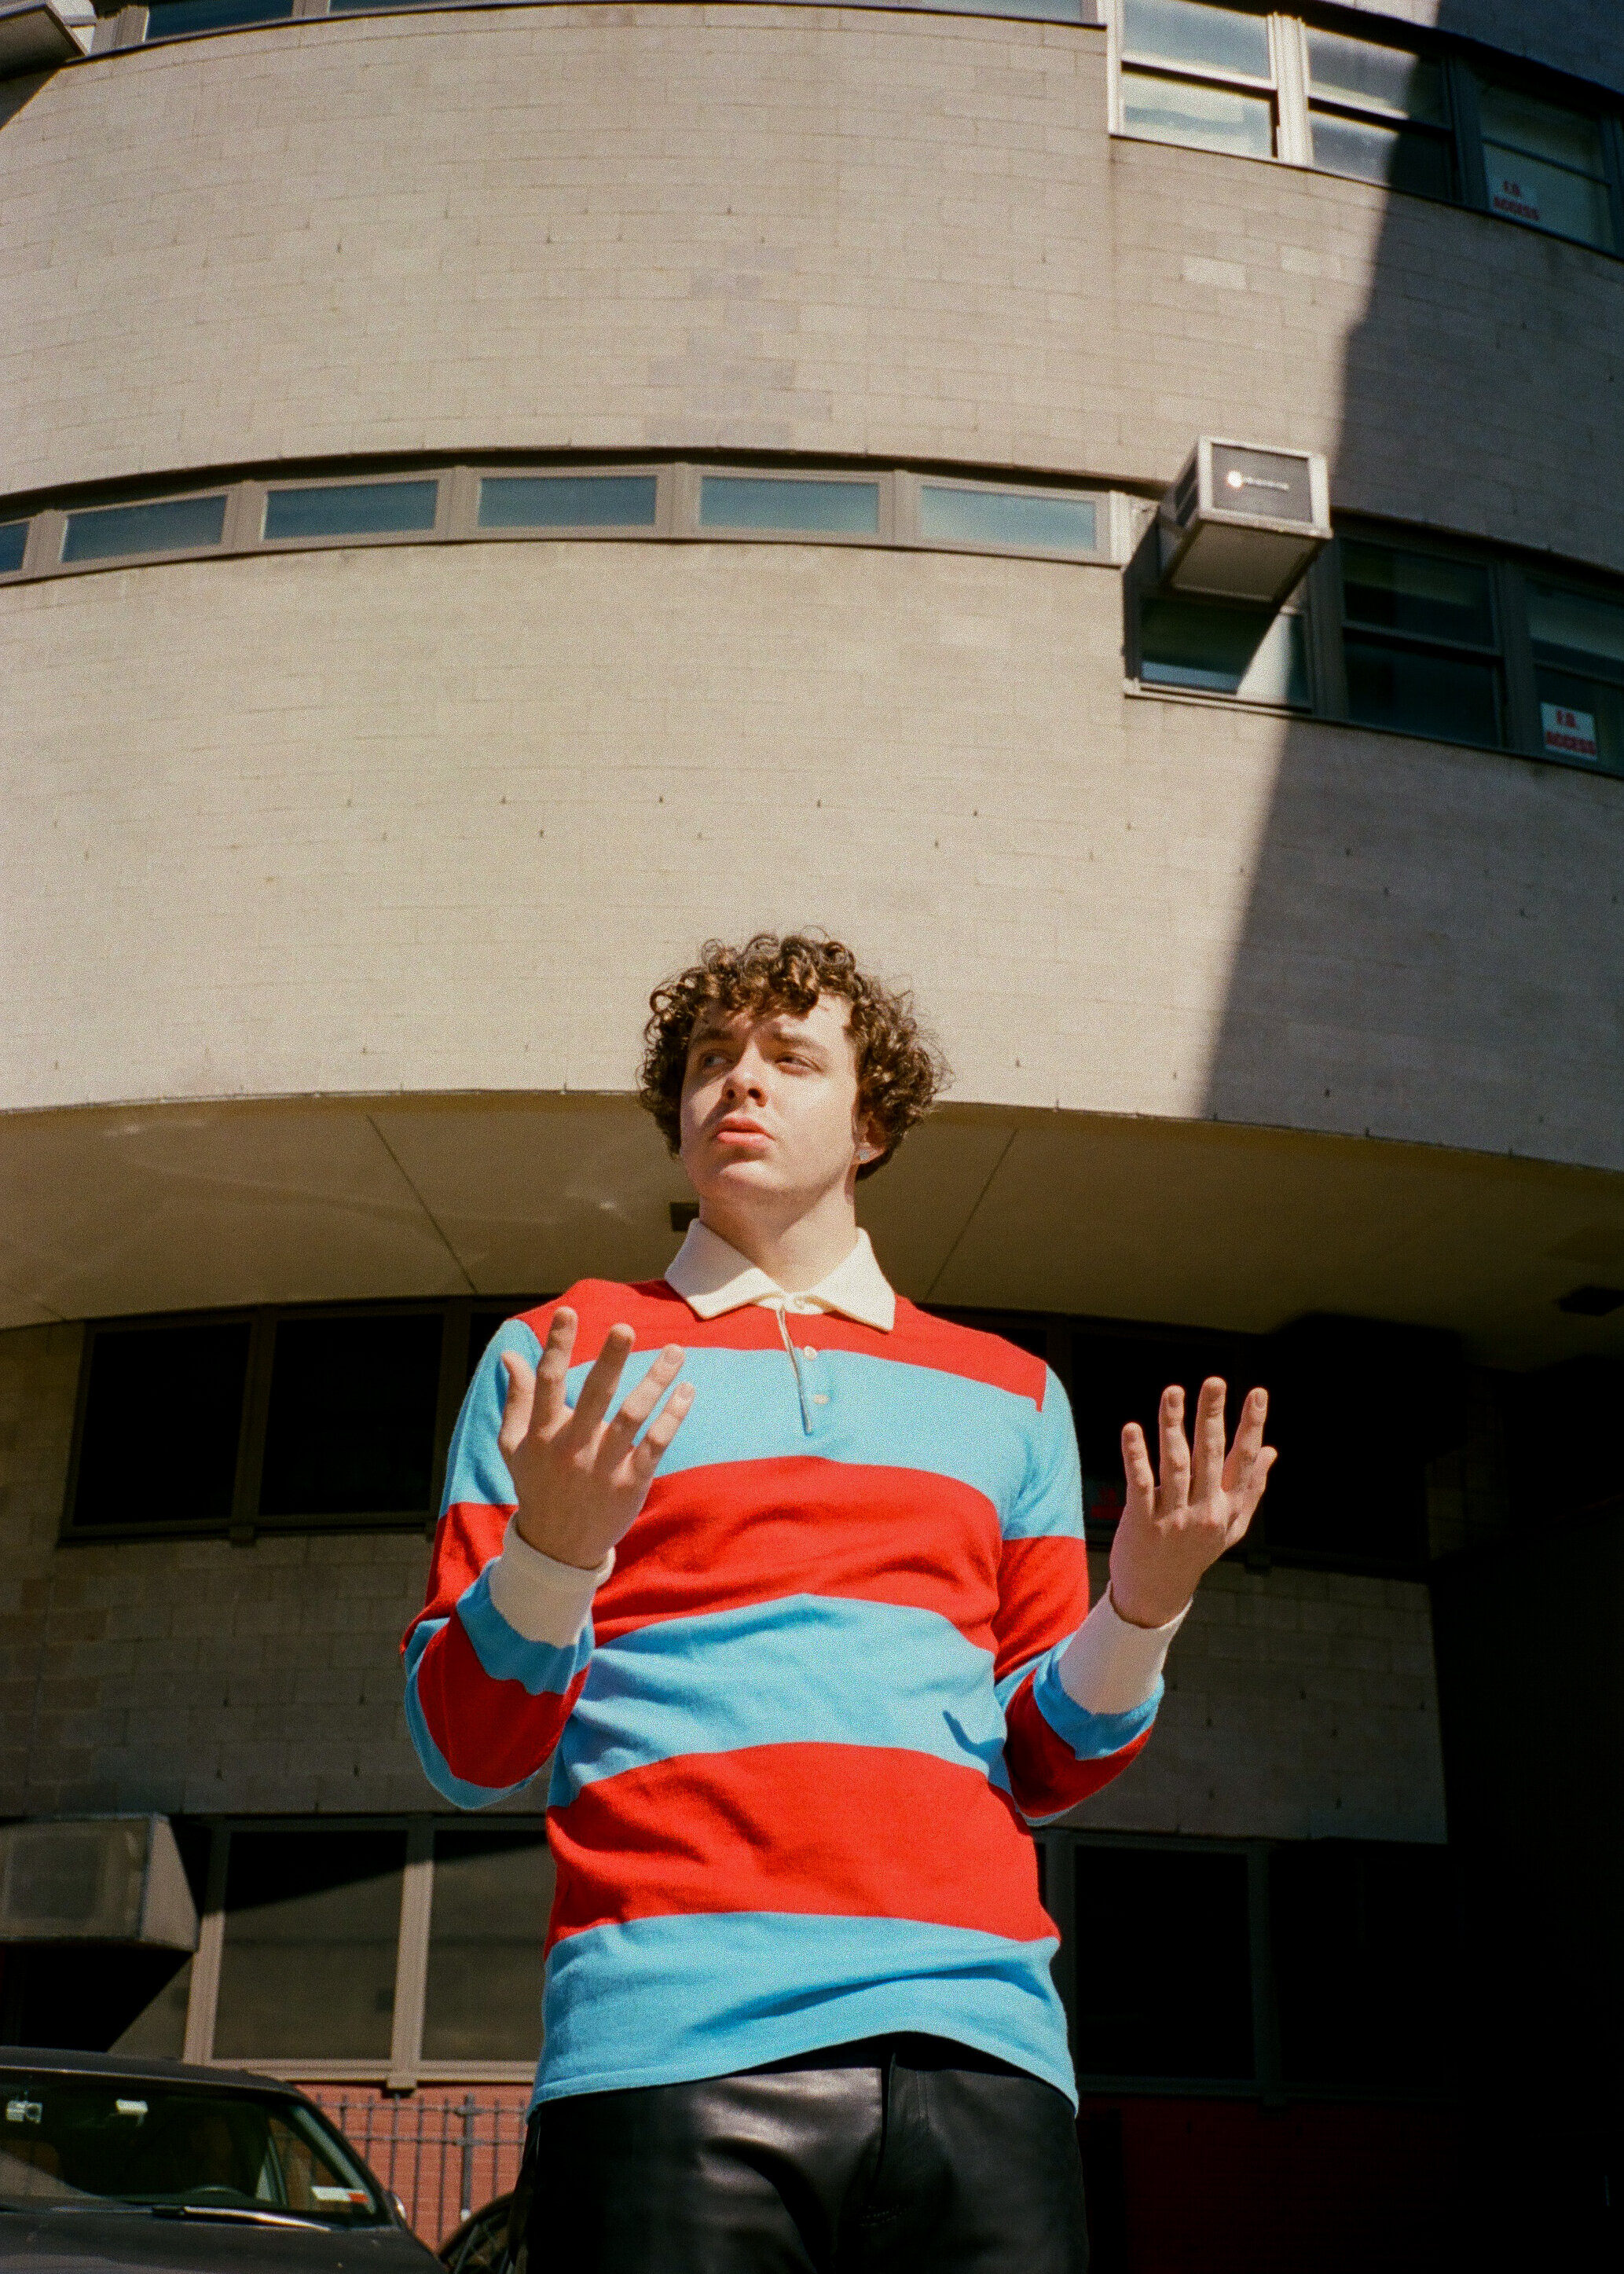 Jack Harlow - Jack Harlow Reveals His Top 5 Rappers Rap Up / He is signed to don cannon and dj drama's generation now record label, which is under atlantic records.